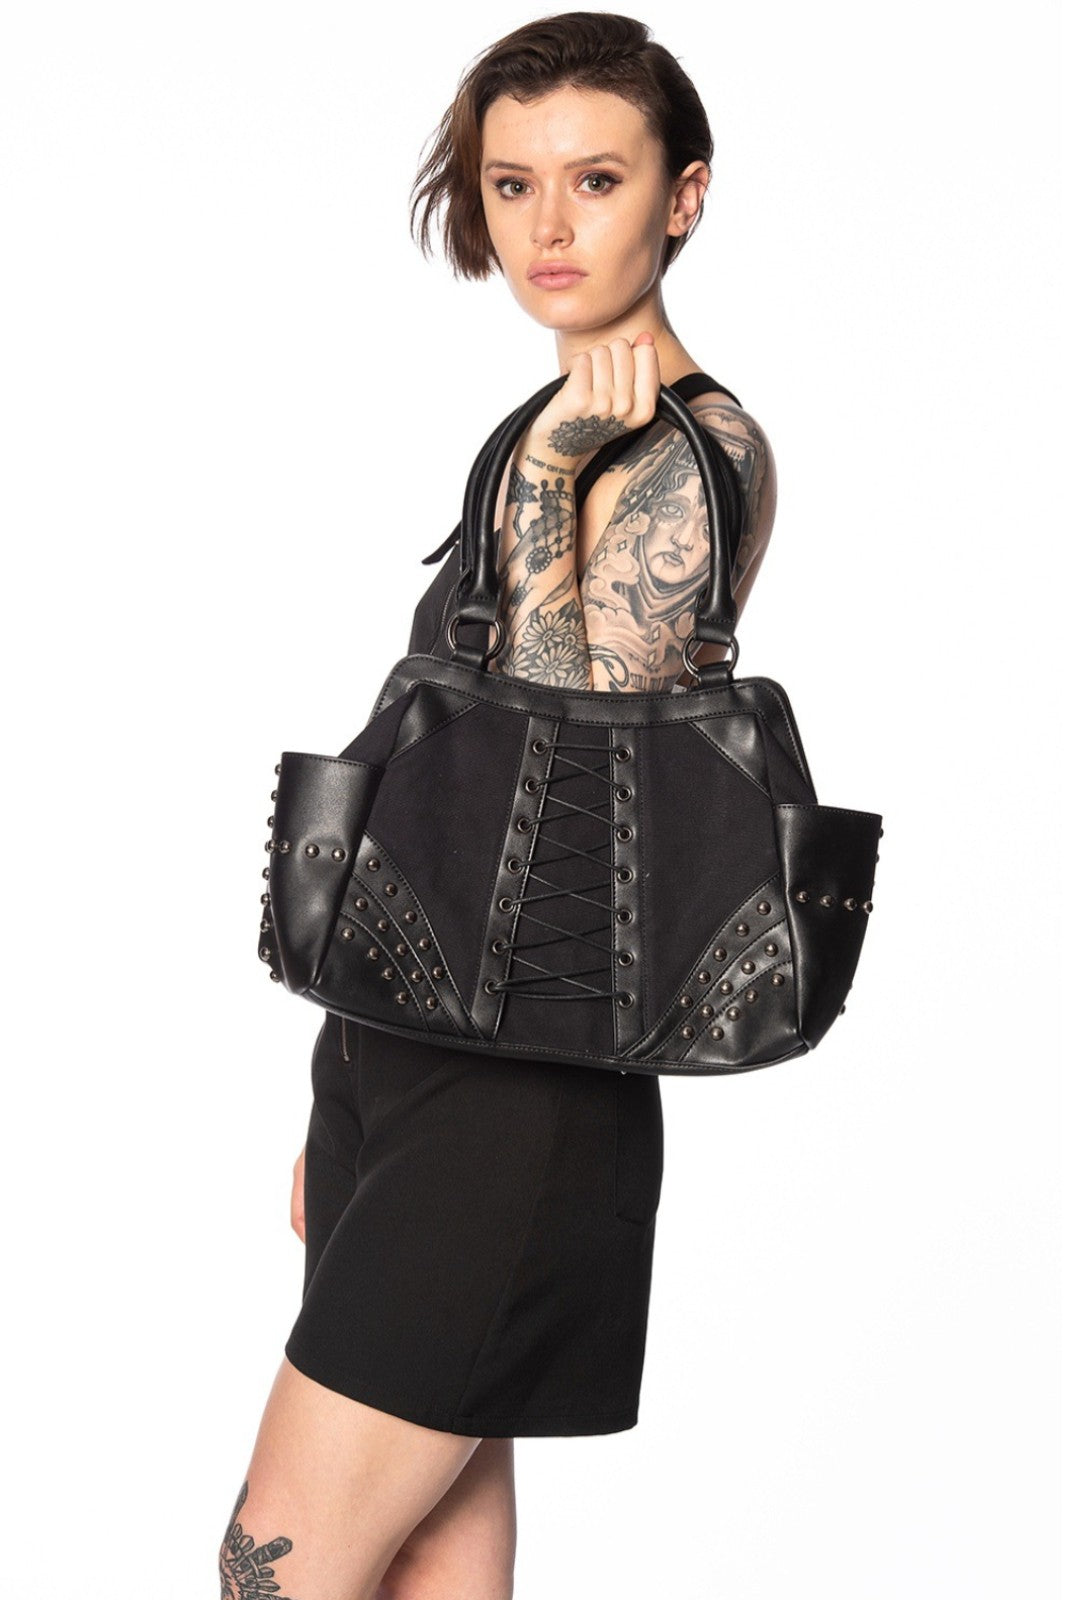 Banned Studded Corset Gothic Annabel Lee Faux Leather Bag